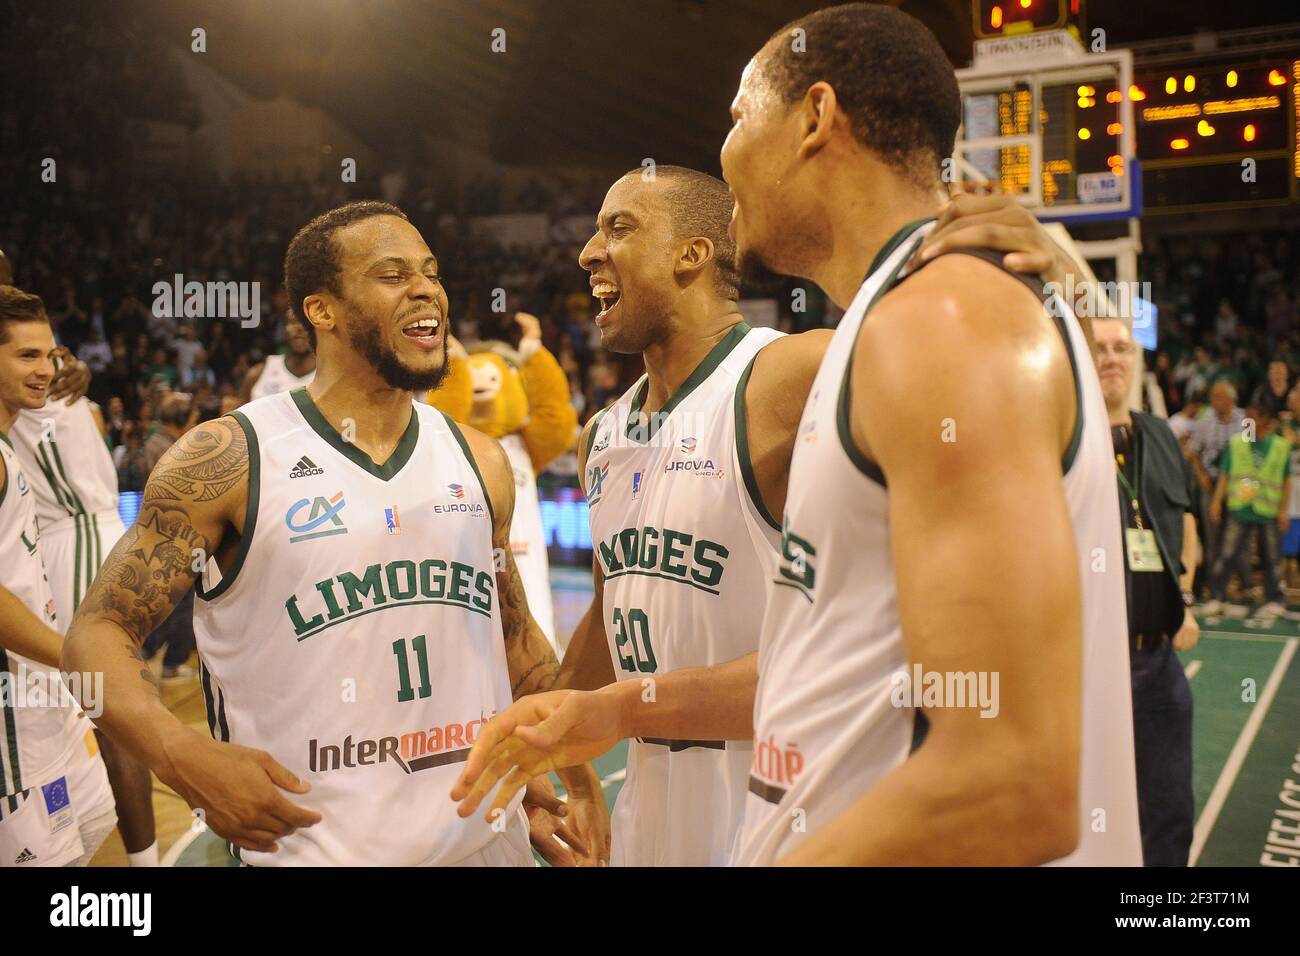 Taurean GREEN, JR REYNOLDS and Alex ACKER celebrate the victory during the  Leg 3 of the French ProA basketball playoffs final match Limoges vs  Strasbourg, on June 5th, 2014 at Palais des